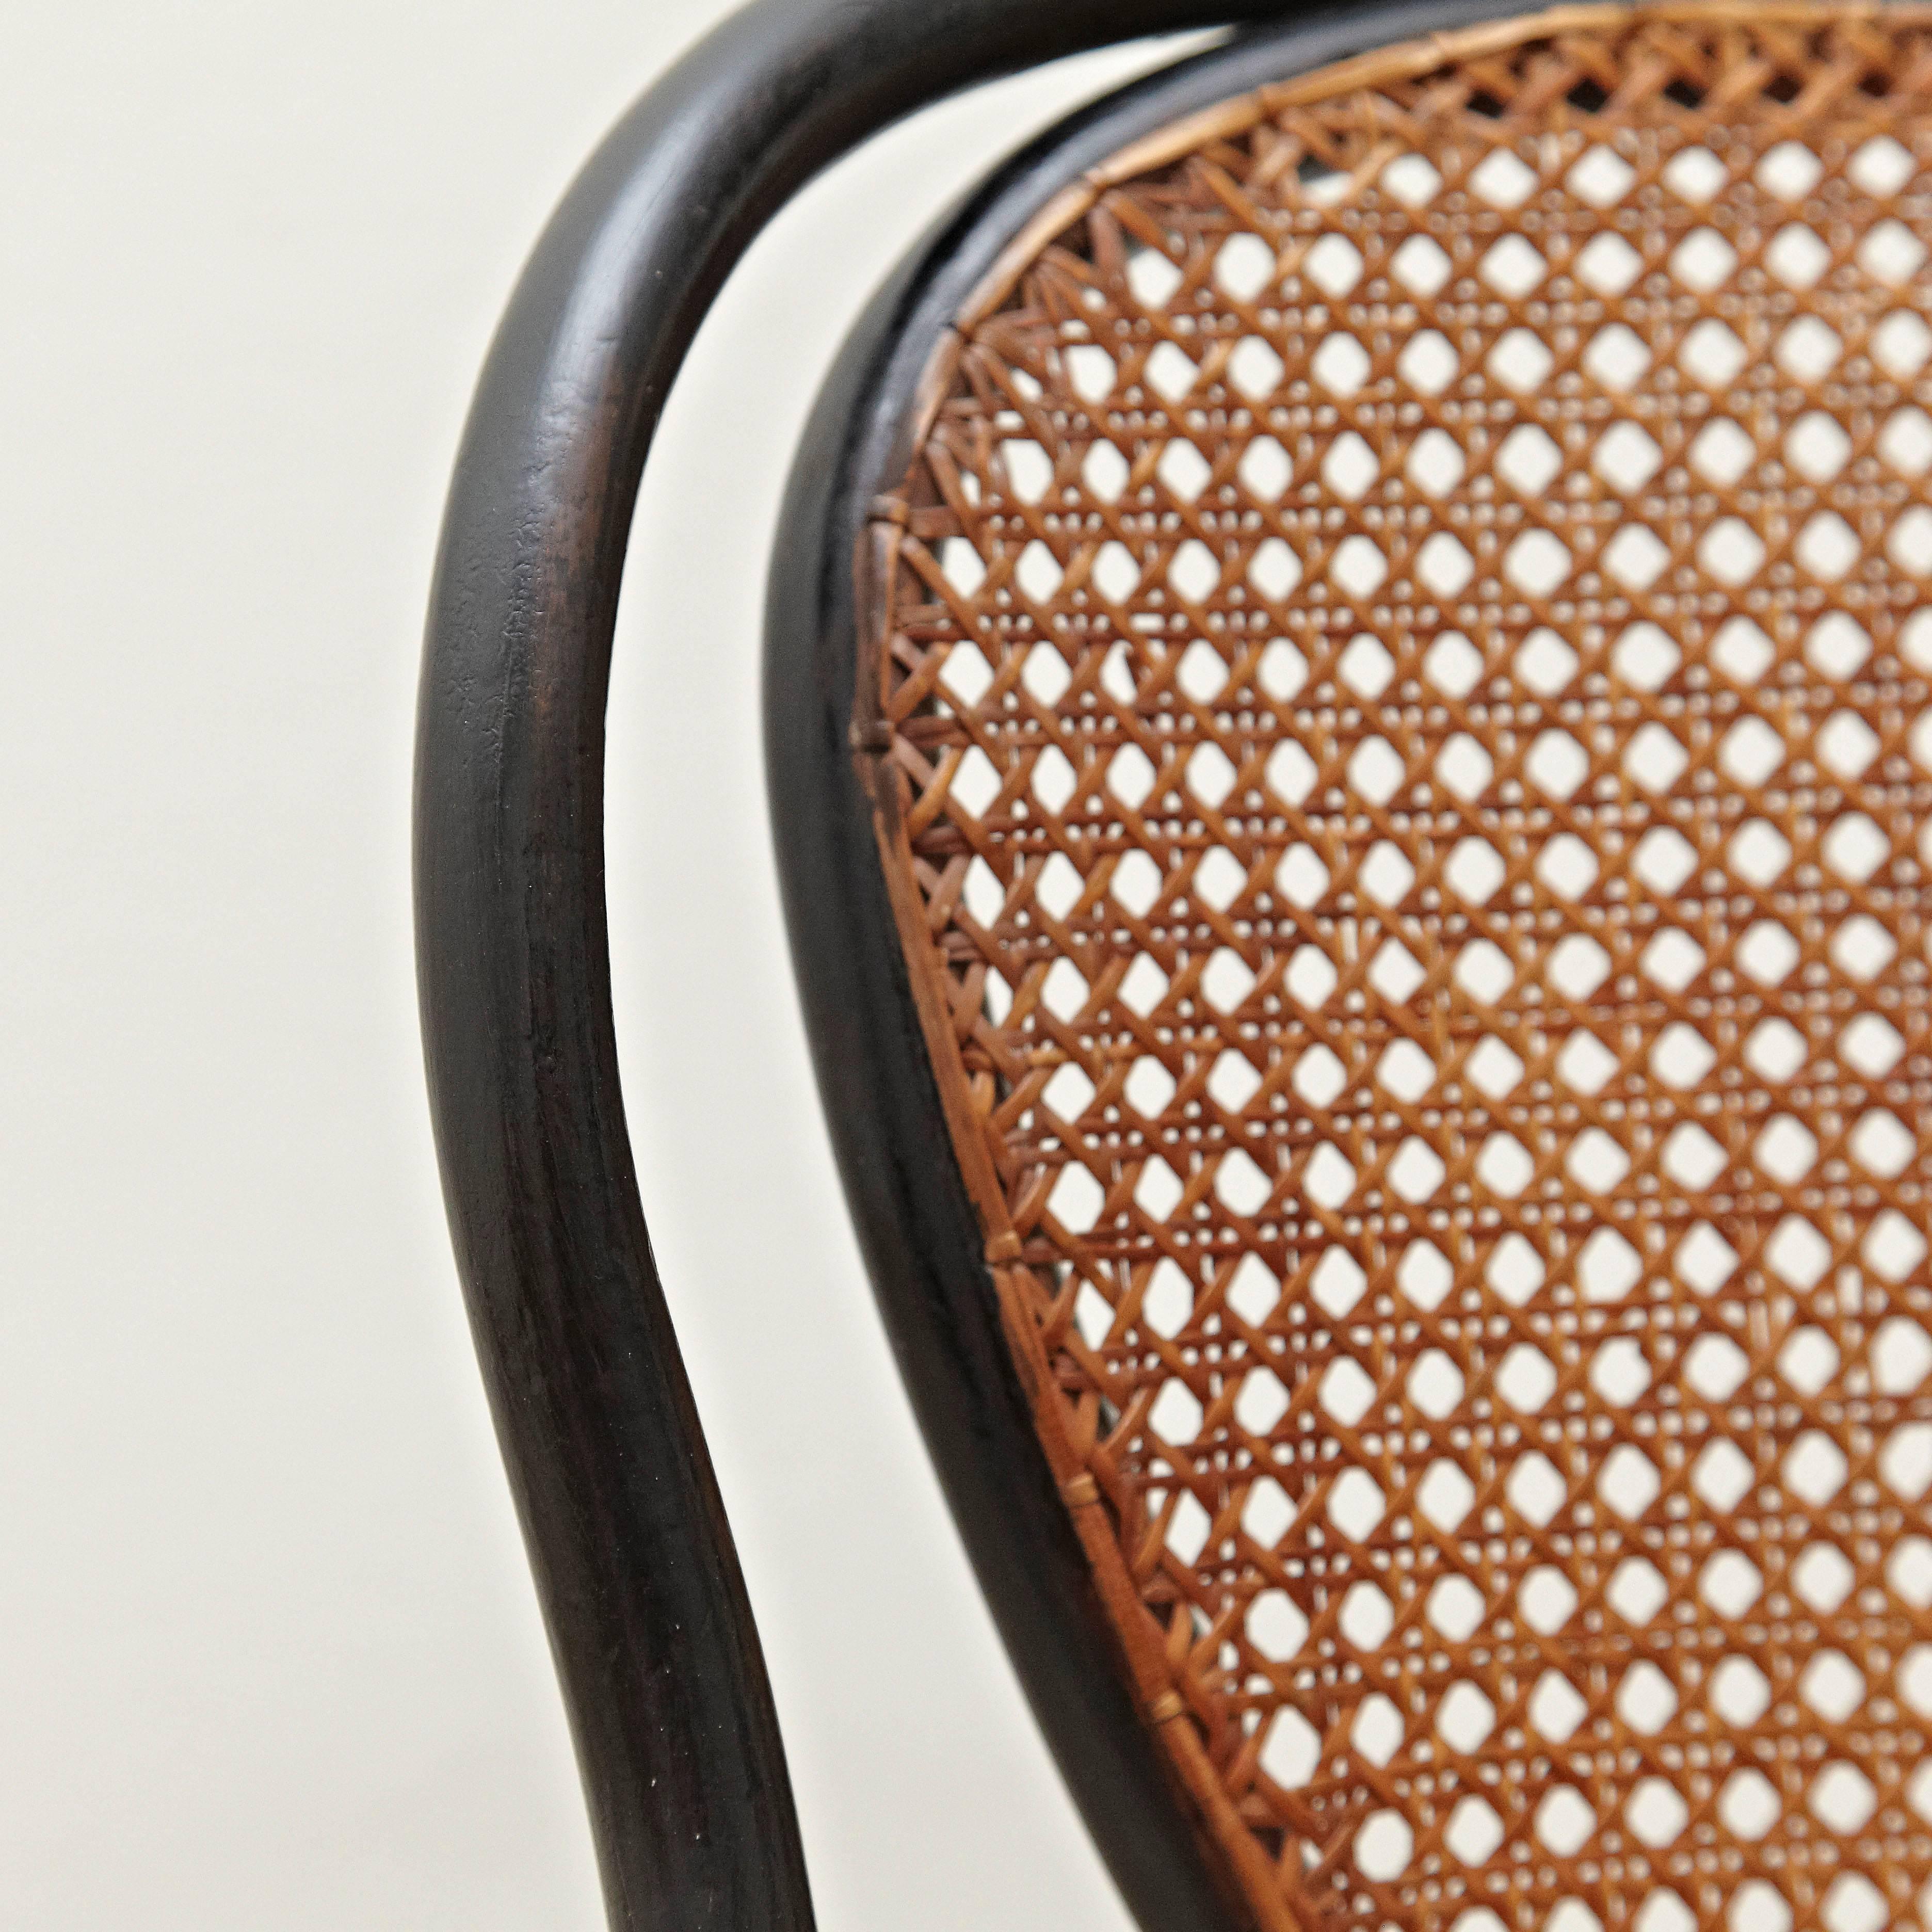 Rattan Thonet Number 1 by Auguste Thonet for Thonet, circa 1900